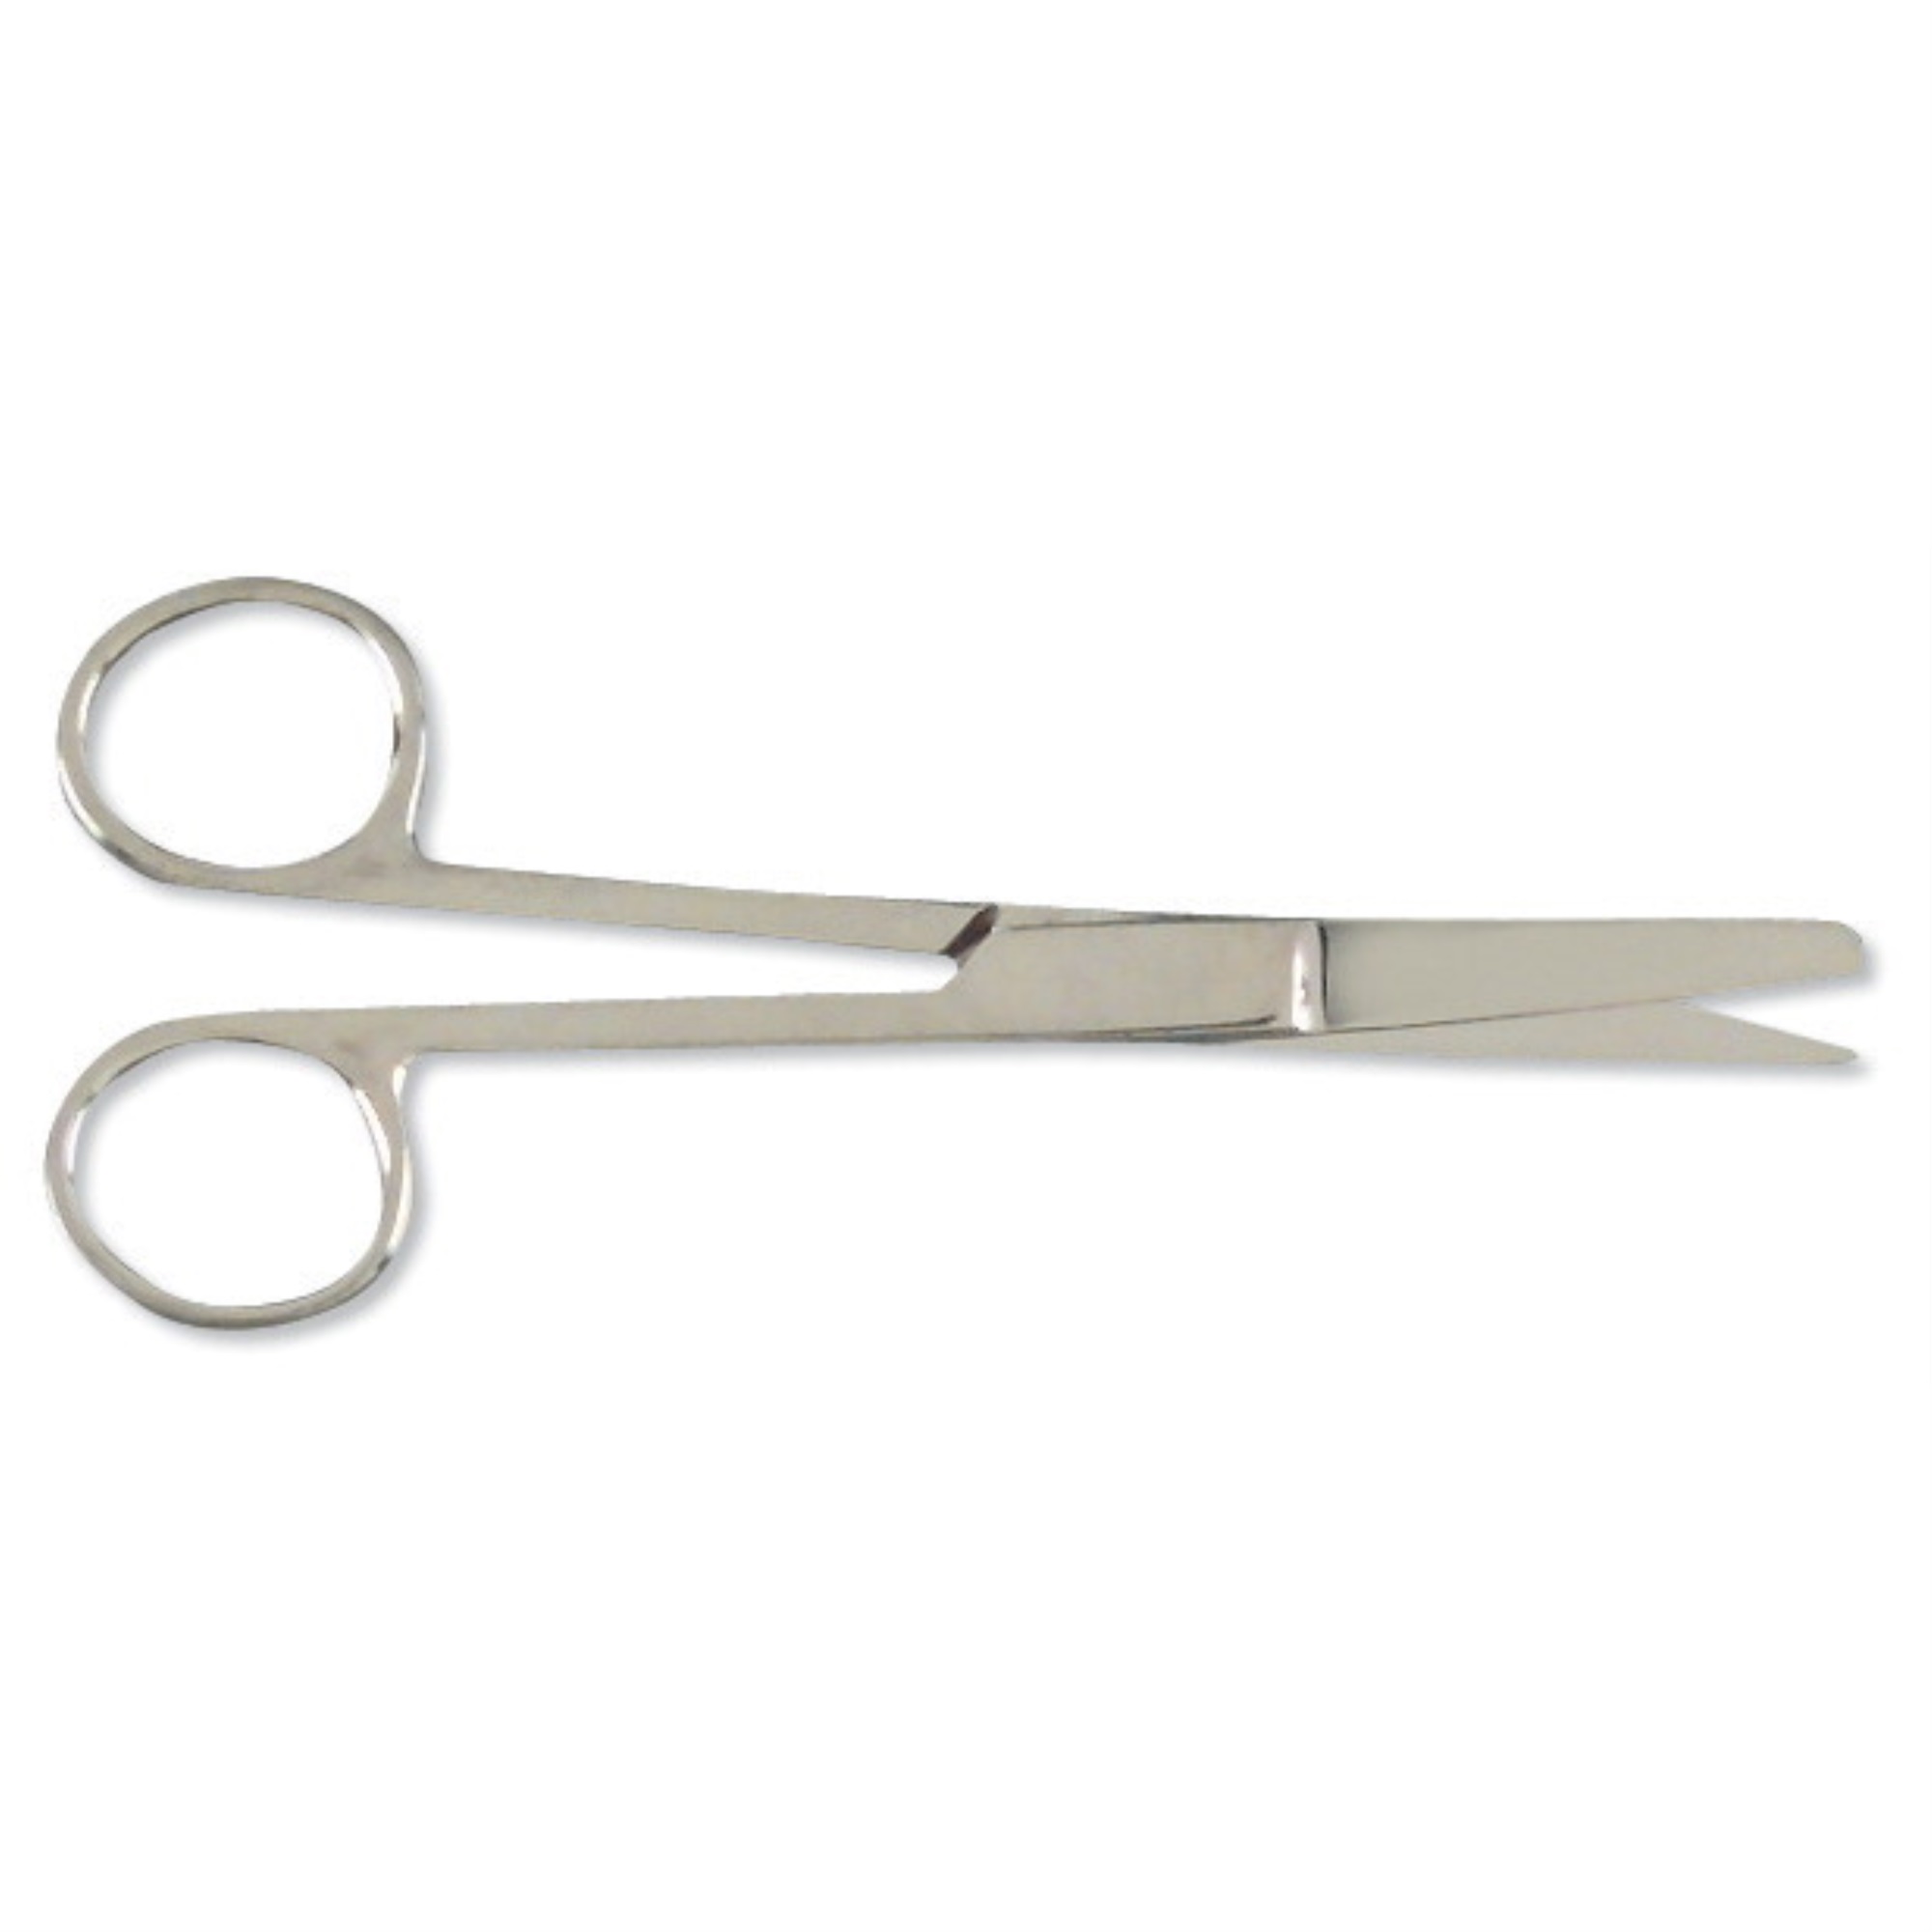 DR Instruments Surgical Dissecting Scissors, Quality Grade